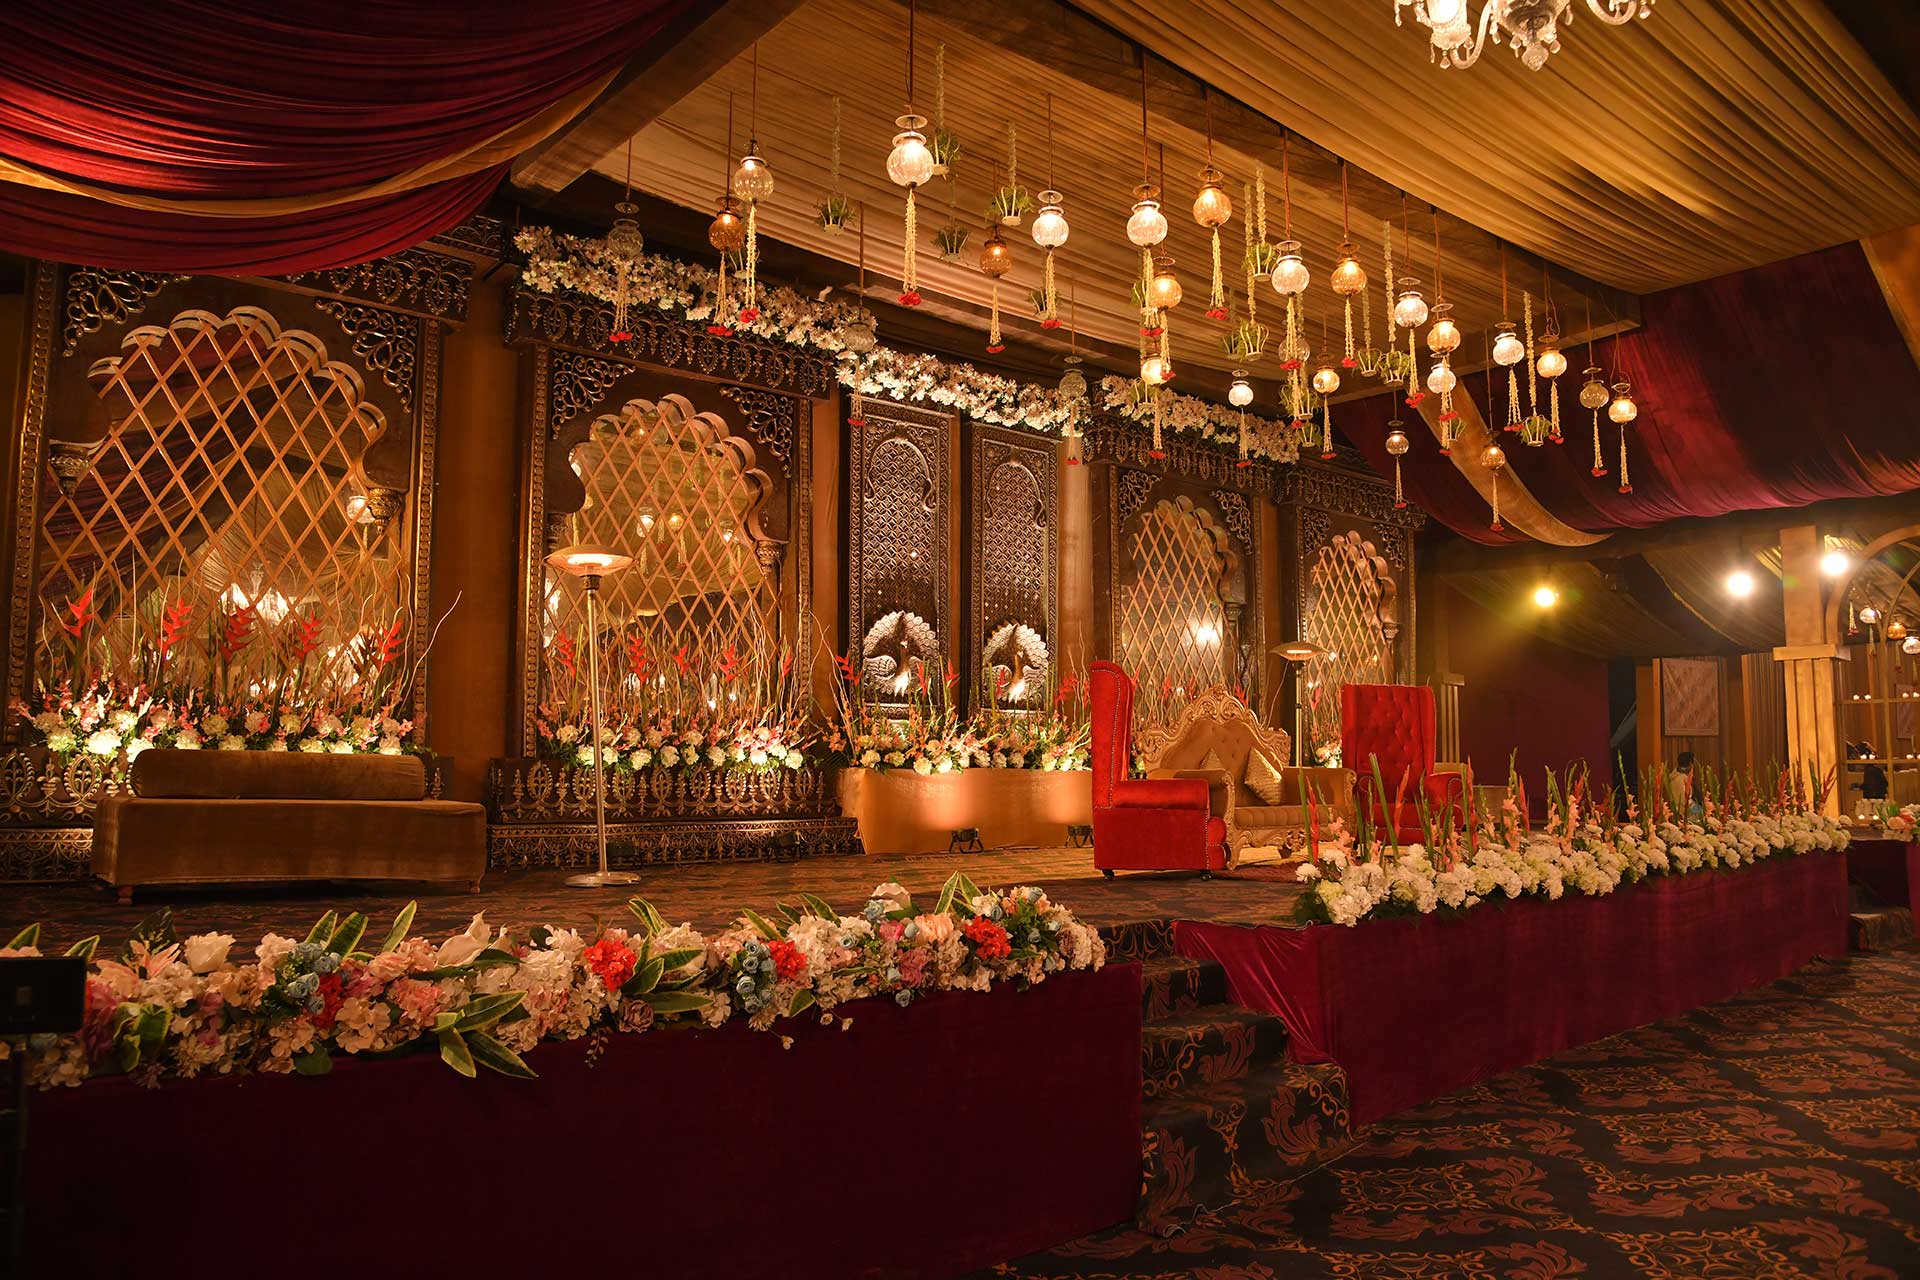 How Early Should I Book an Indian Wedding Venue? Complete Guide To Booking Wedding Venues